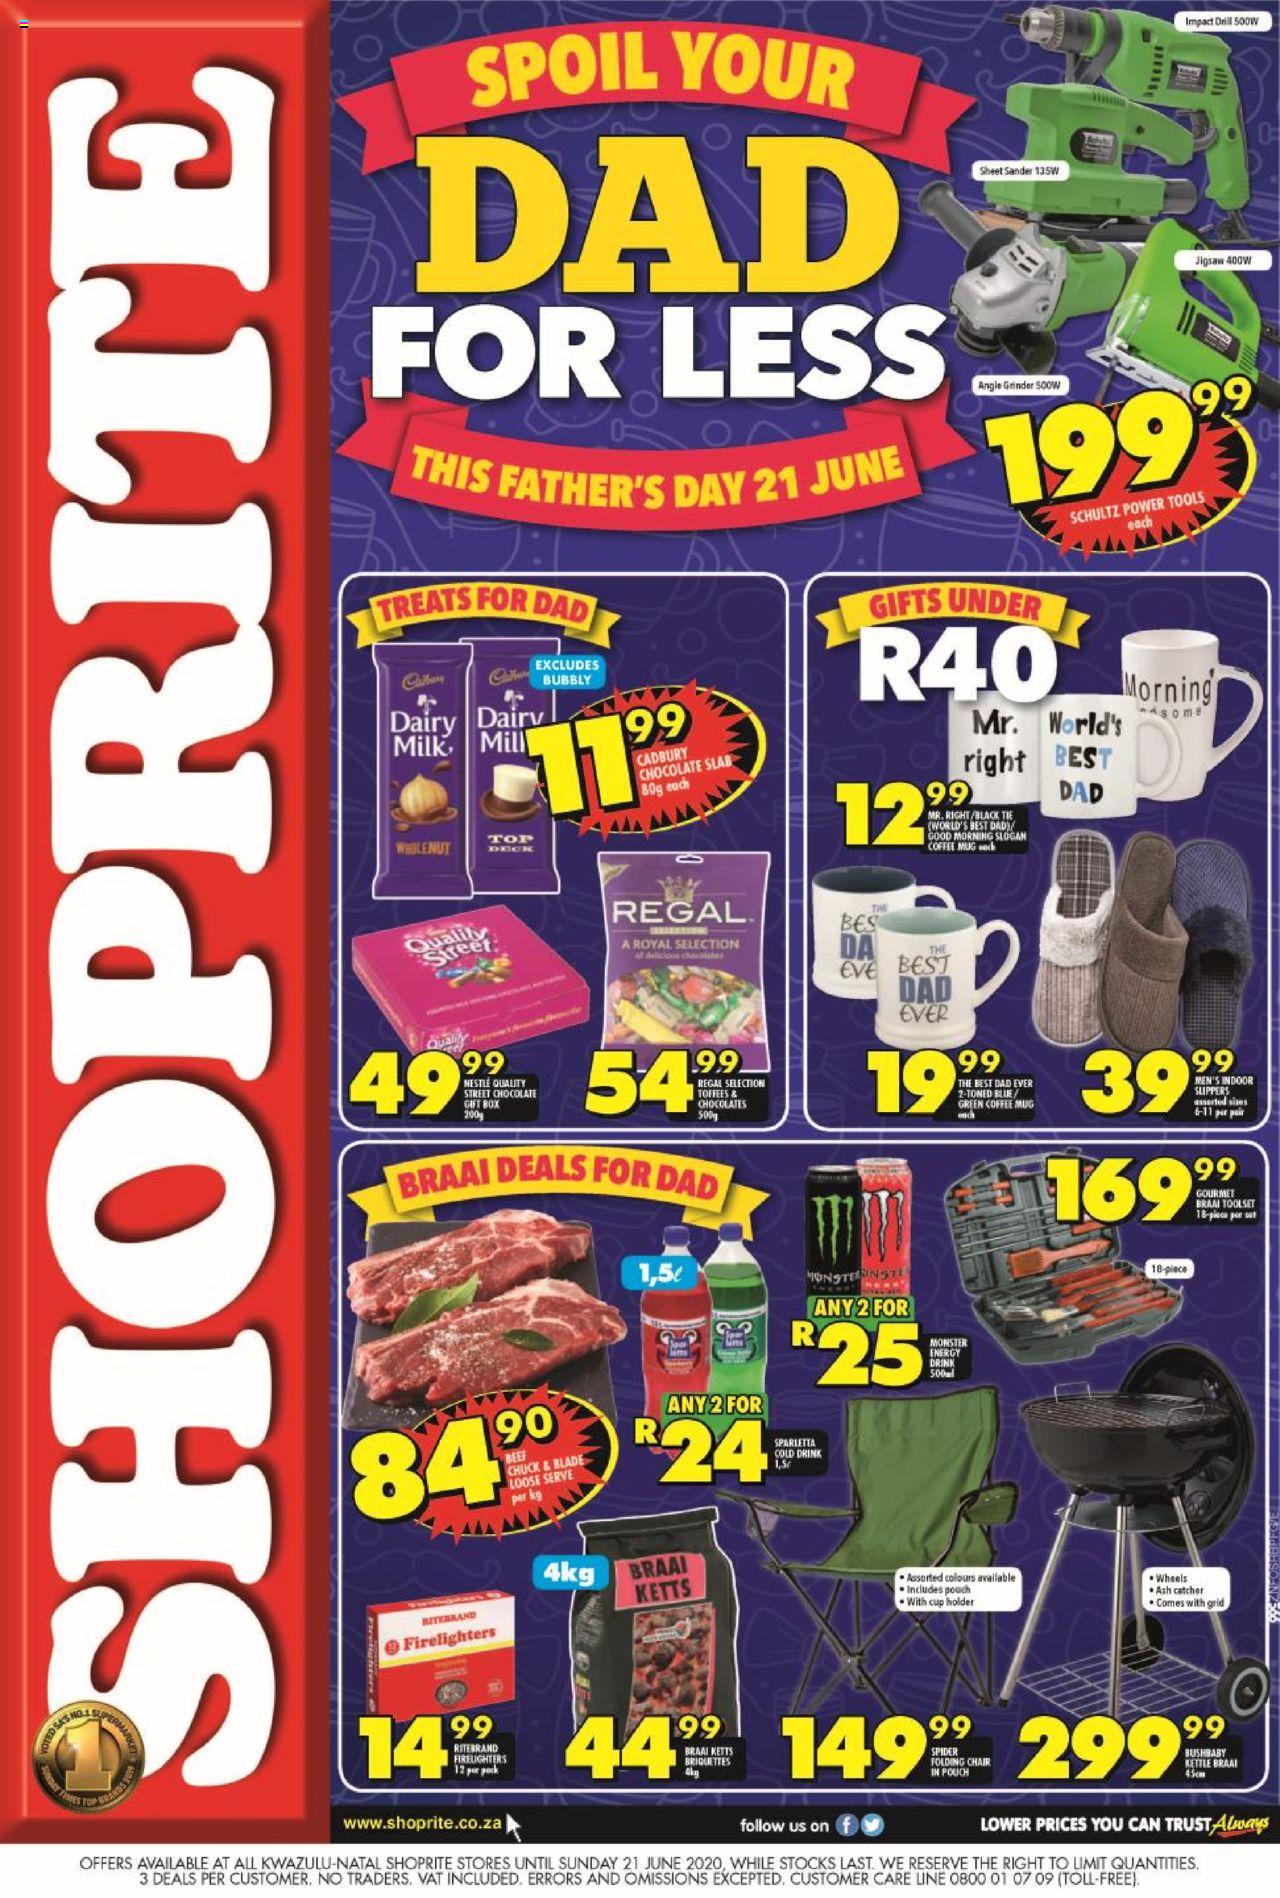 shoprite specials fathers day promotion 16 june 2020